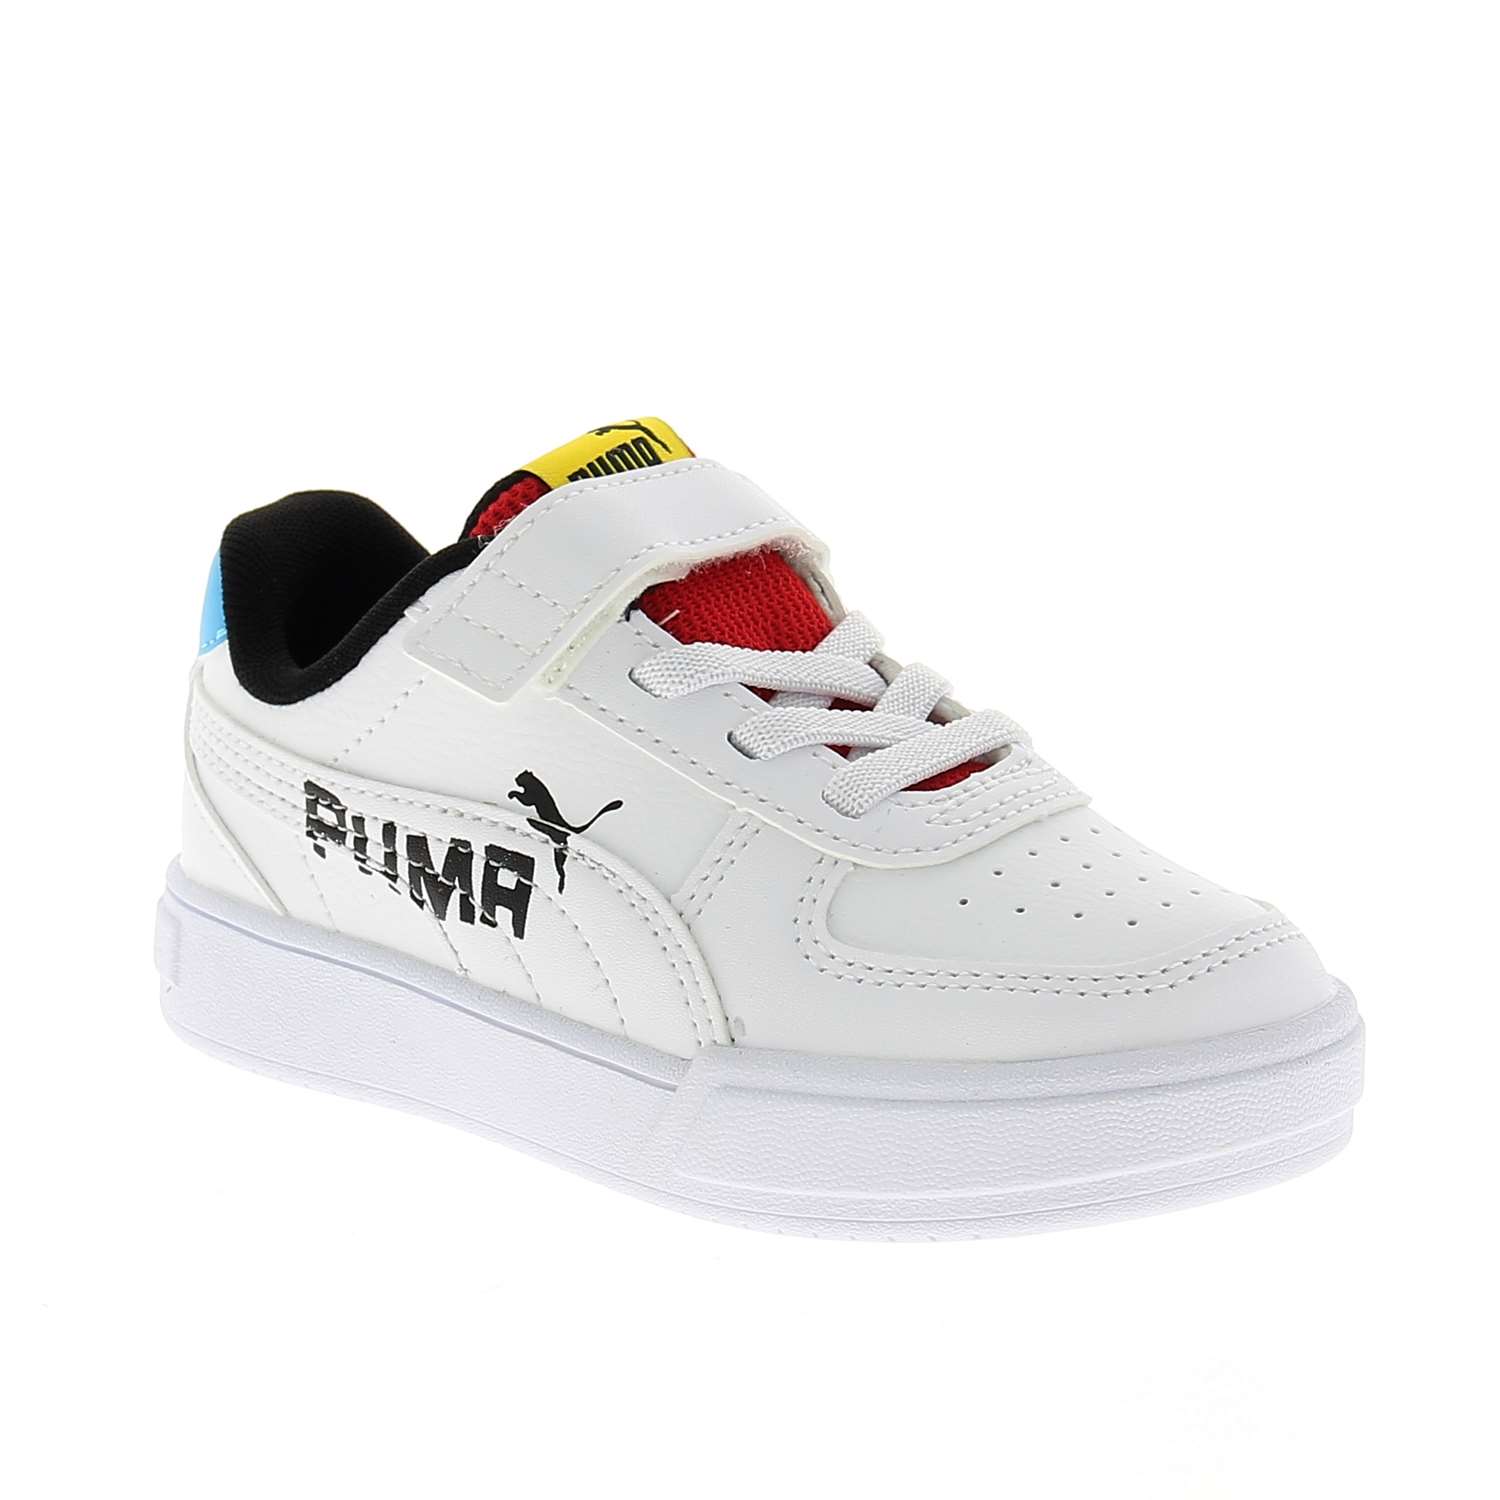 01 - CAVEN BRAND LOVE AC INF - PUMA - Baskets - Synthétique